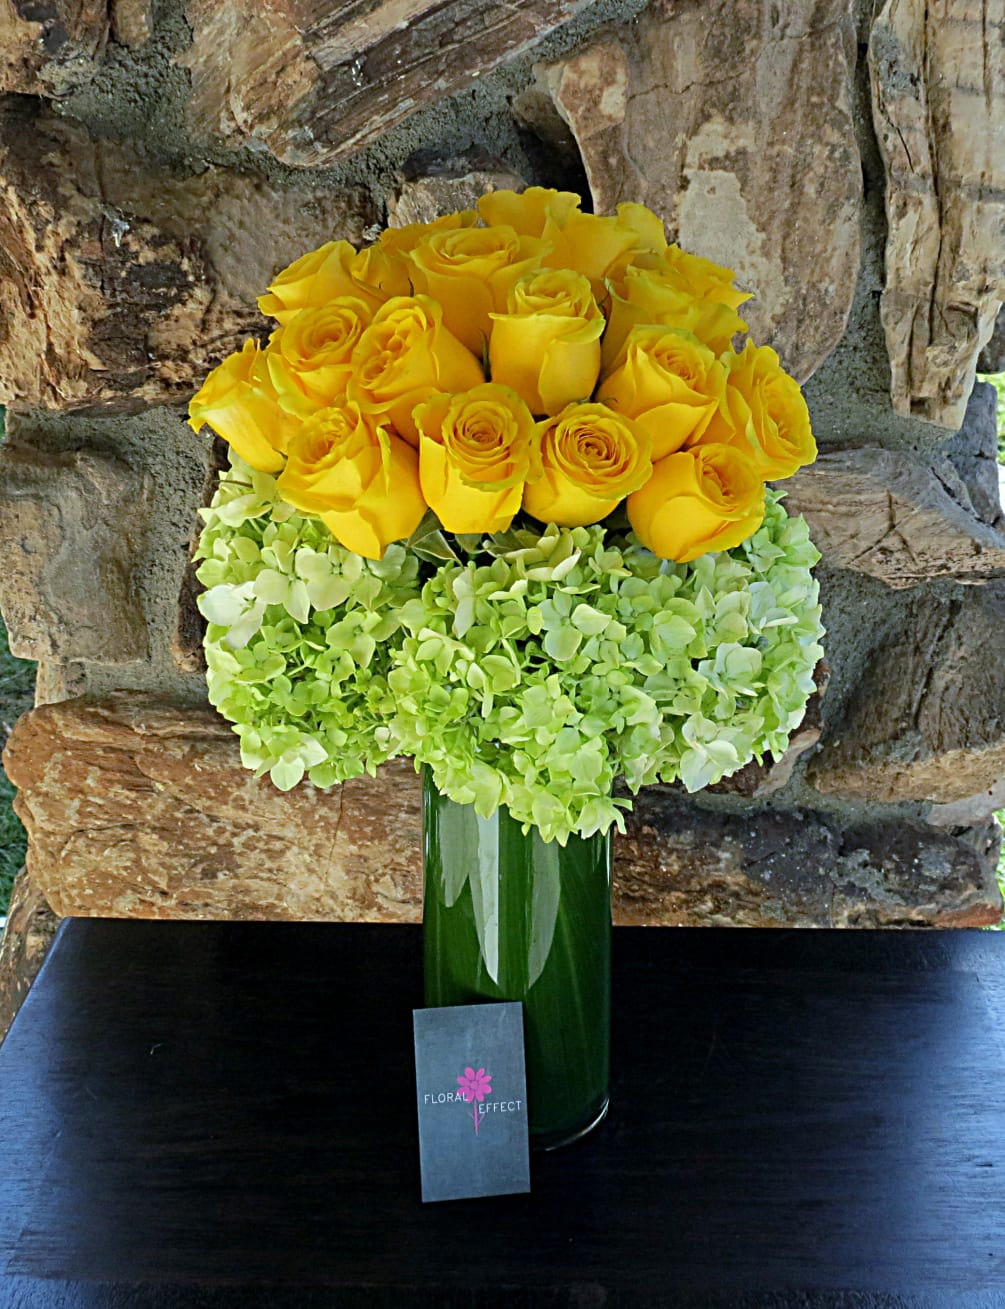 Yellow roses and hydrangeas arranged in a glass vase